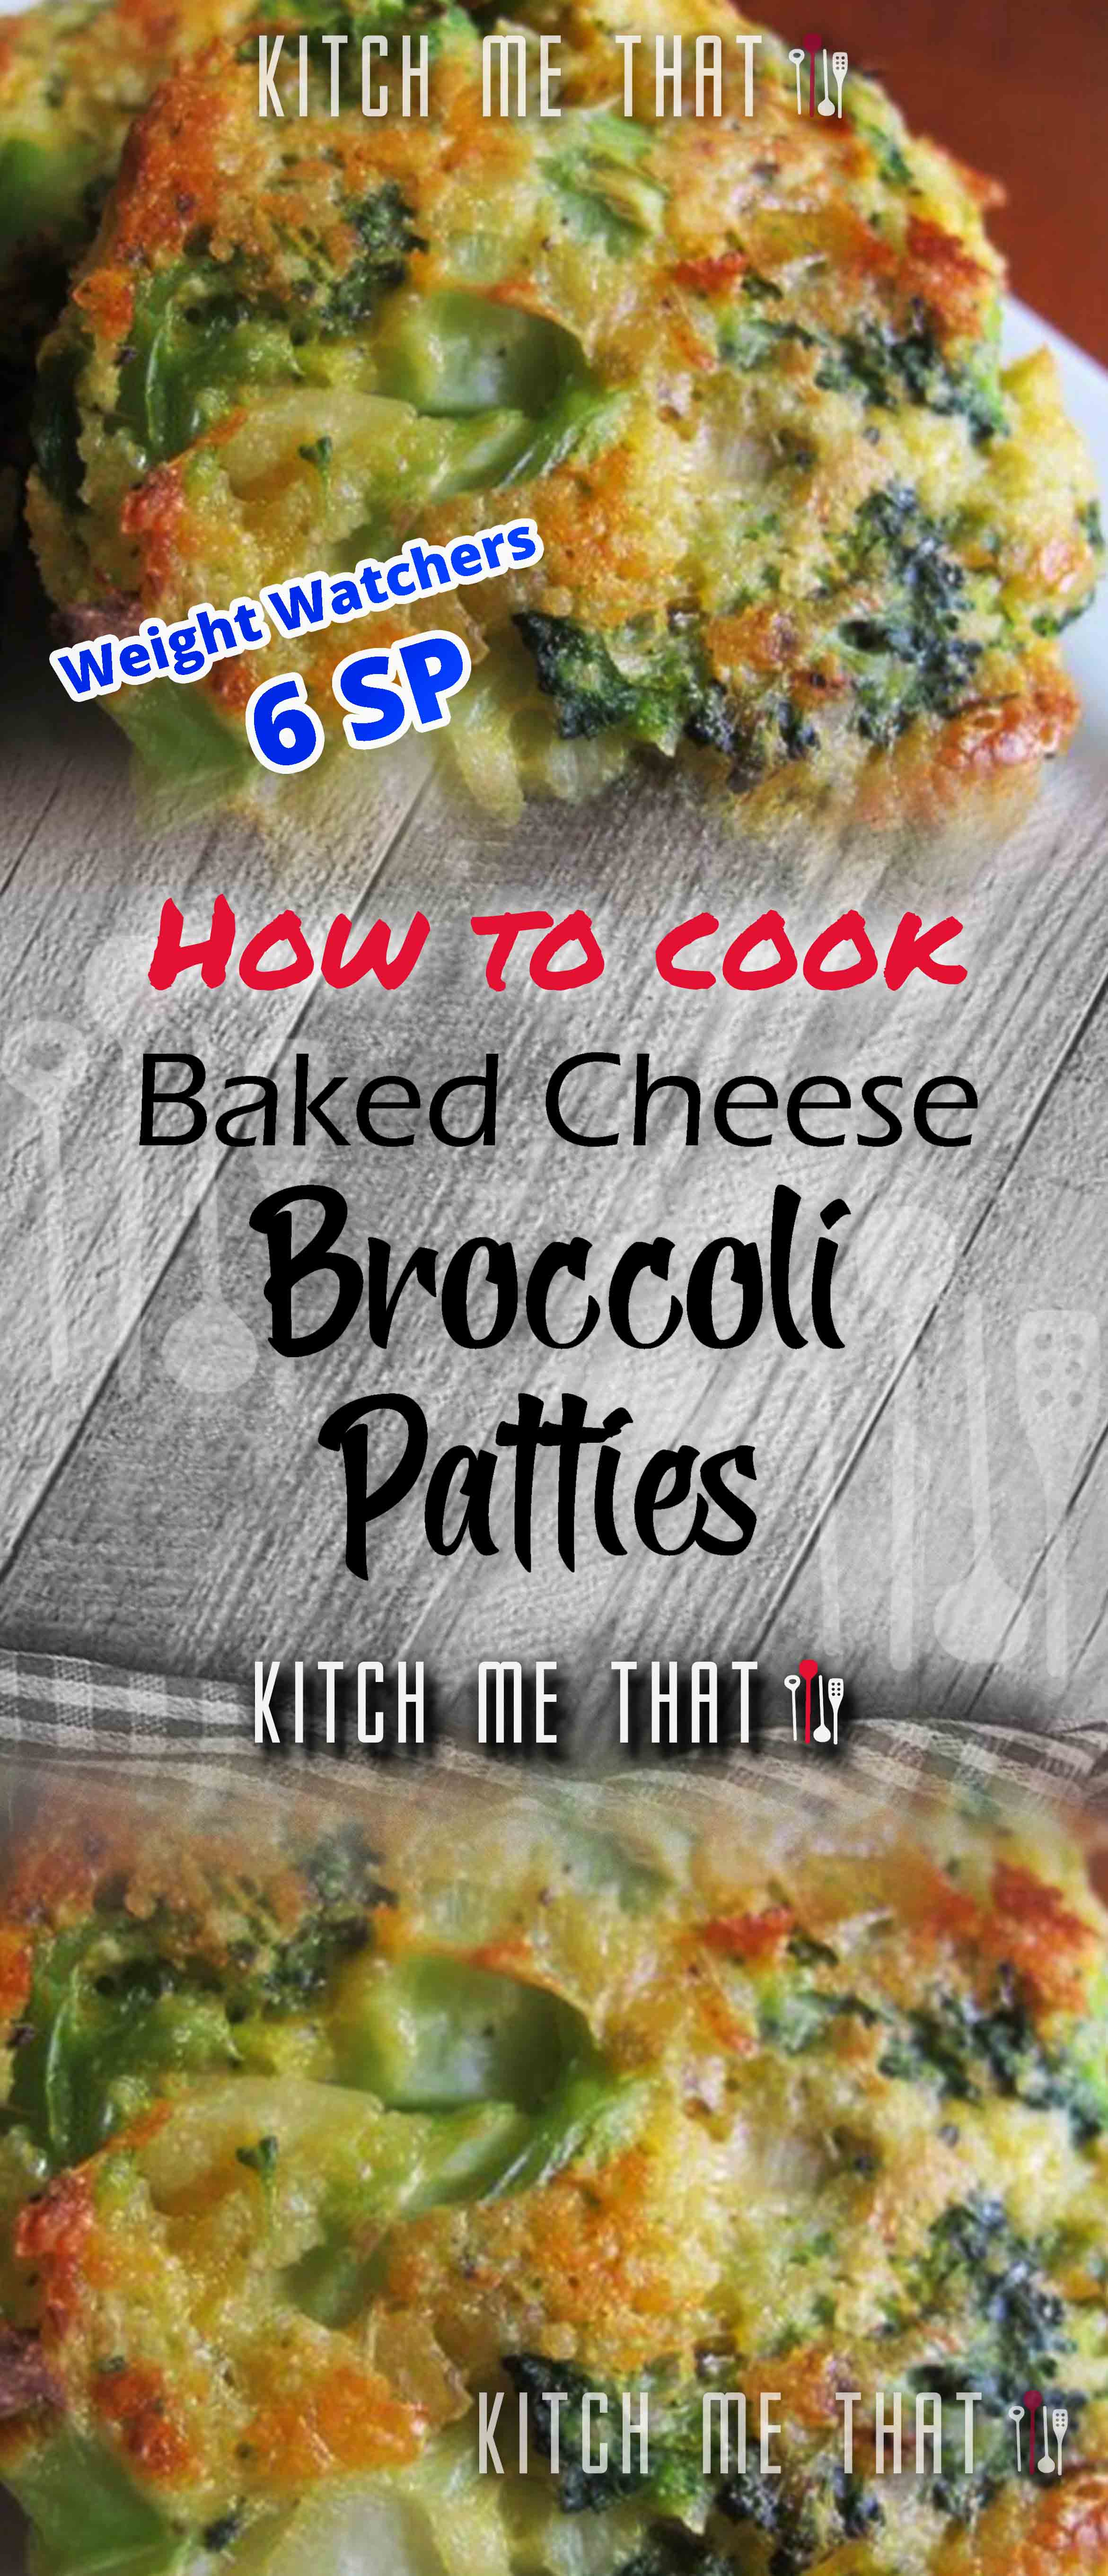 Exclusive Baked Cheese & Broccoli Patties NEW 2021